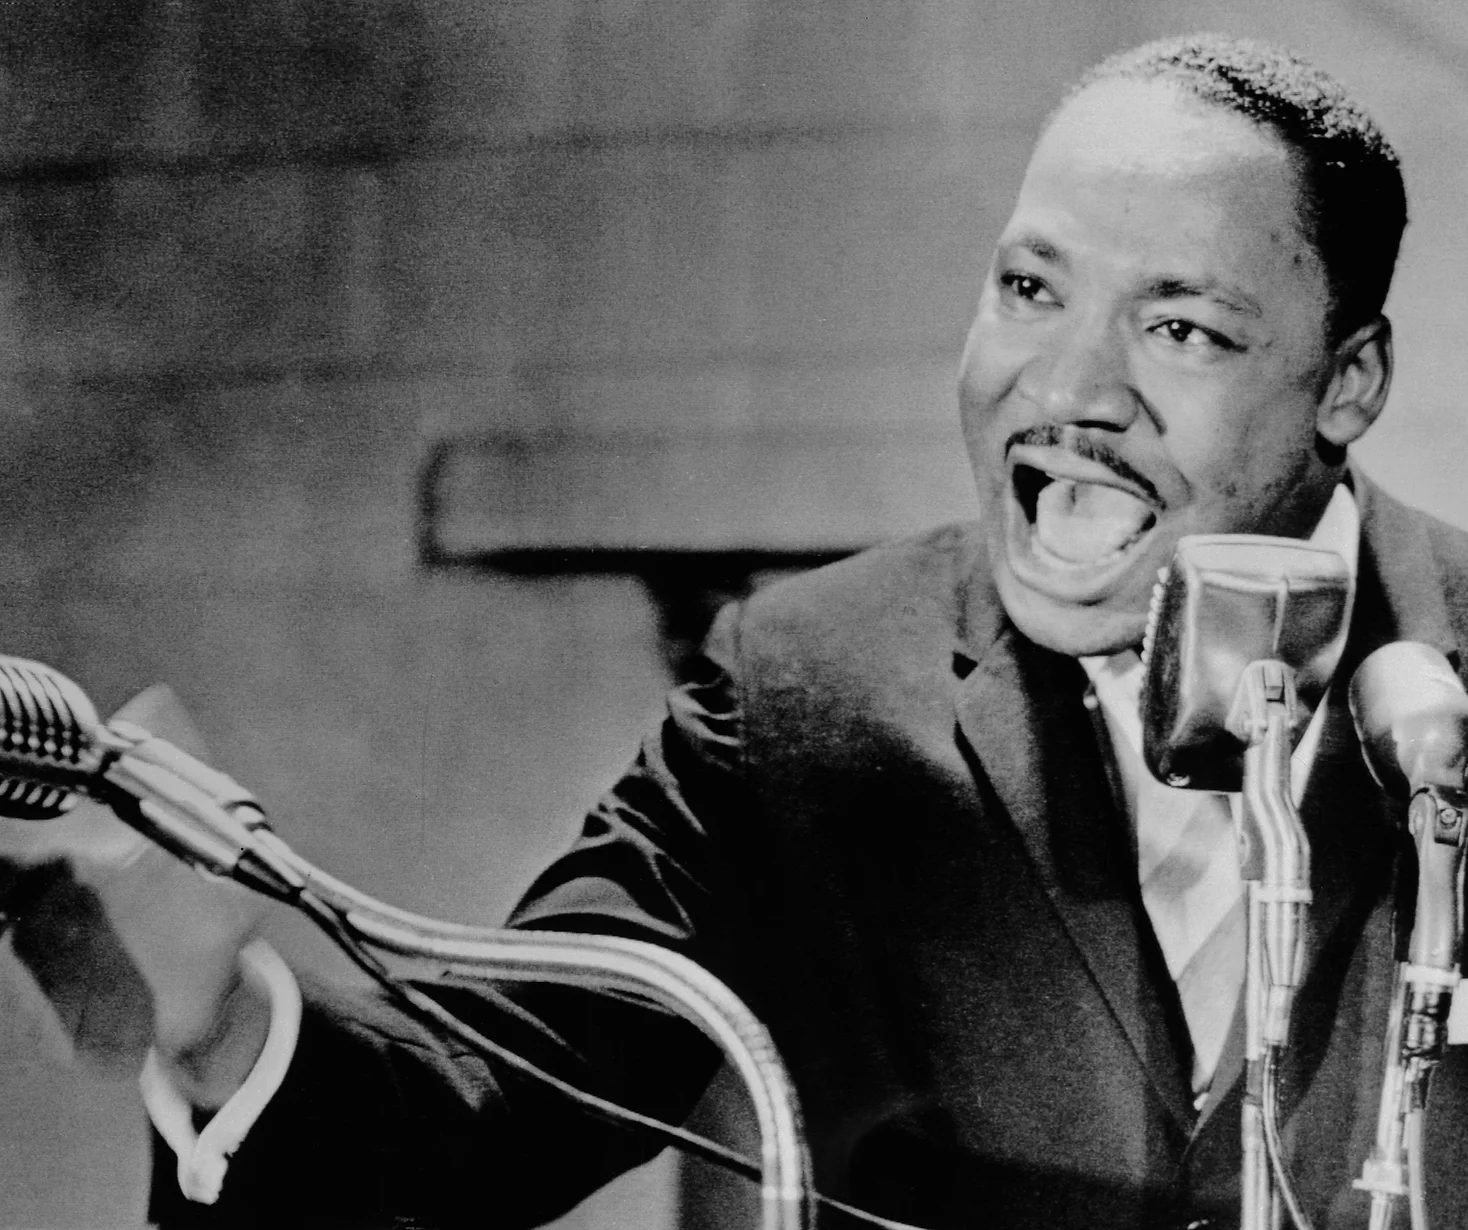 merican religious and Civil Rights leader Reverend Martin Luther King Jr (1929 – 1968) speaks at Fisk University, Nashville, Tennessee, May 3, 1964.